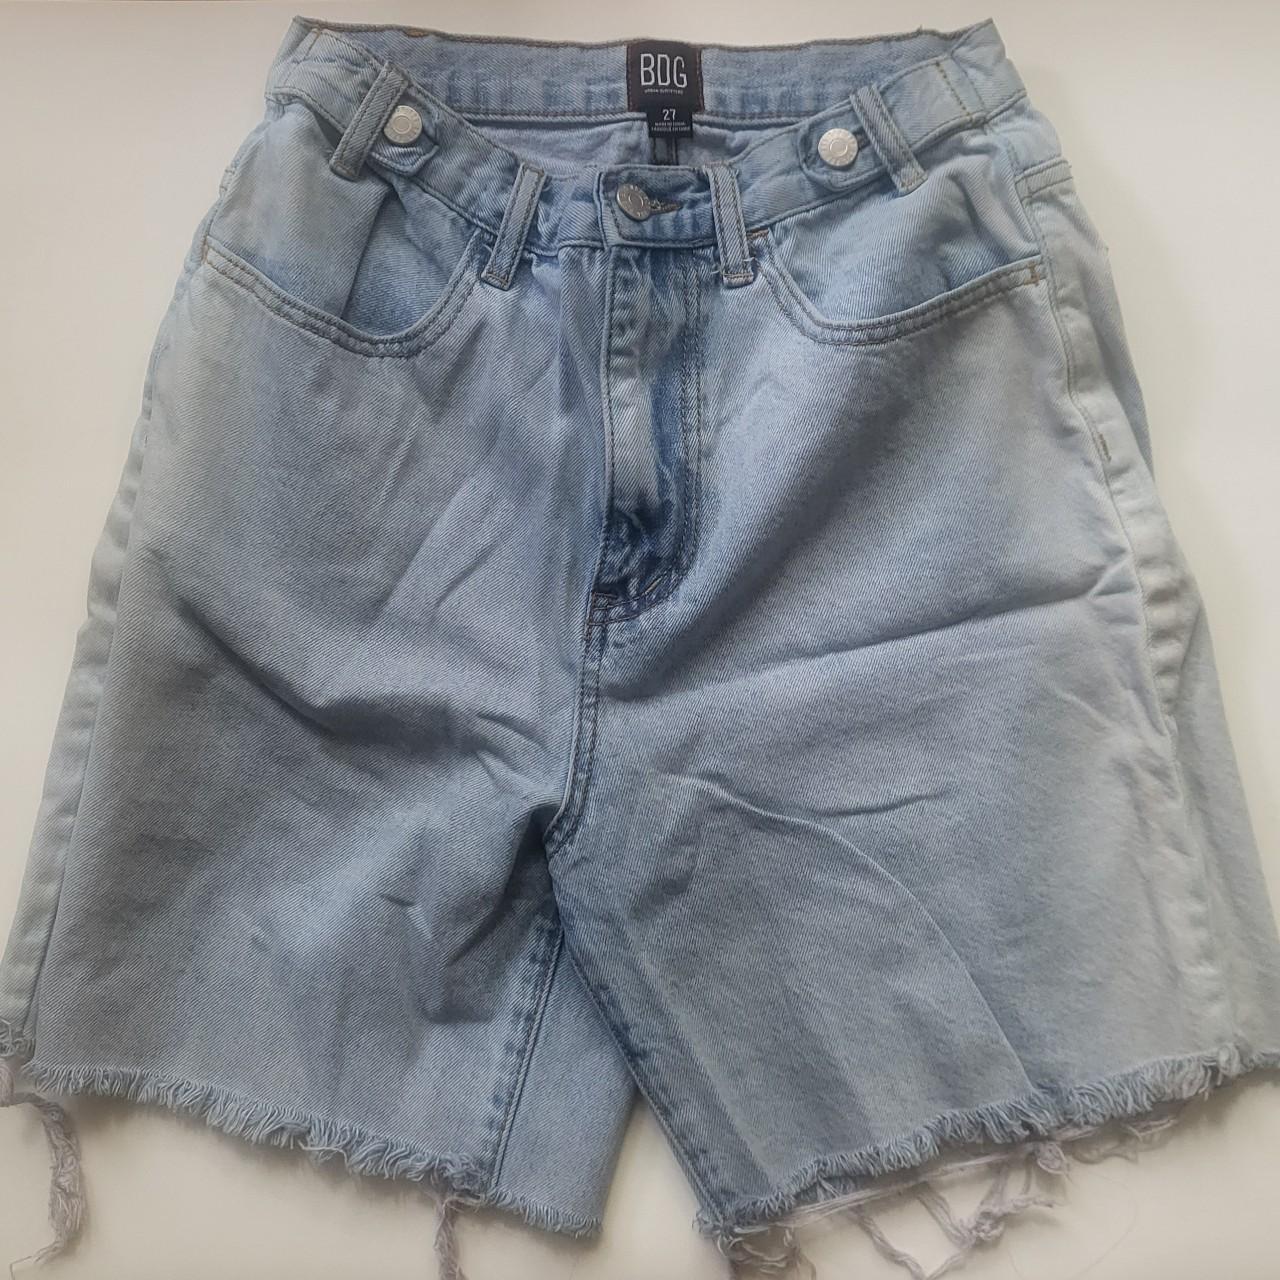 BDG JORTS - URBAN OUTFITTERS - SIZE 27 - Depop